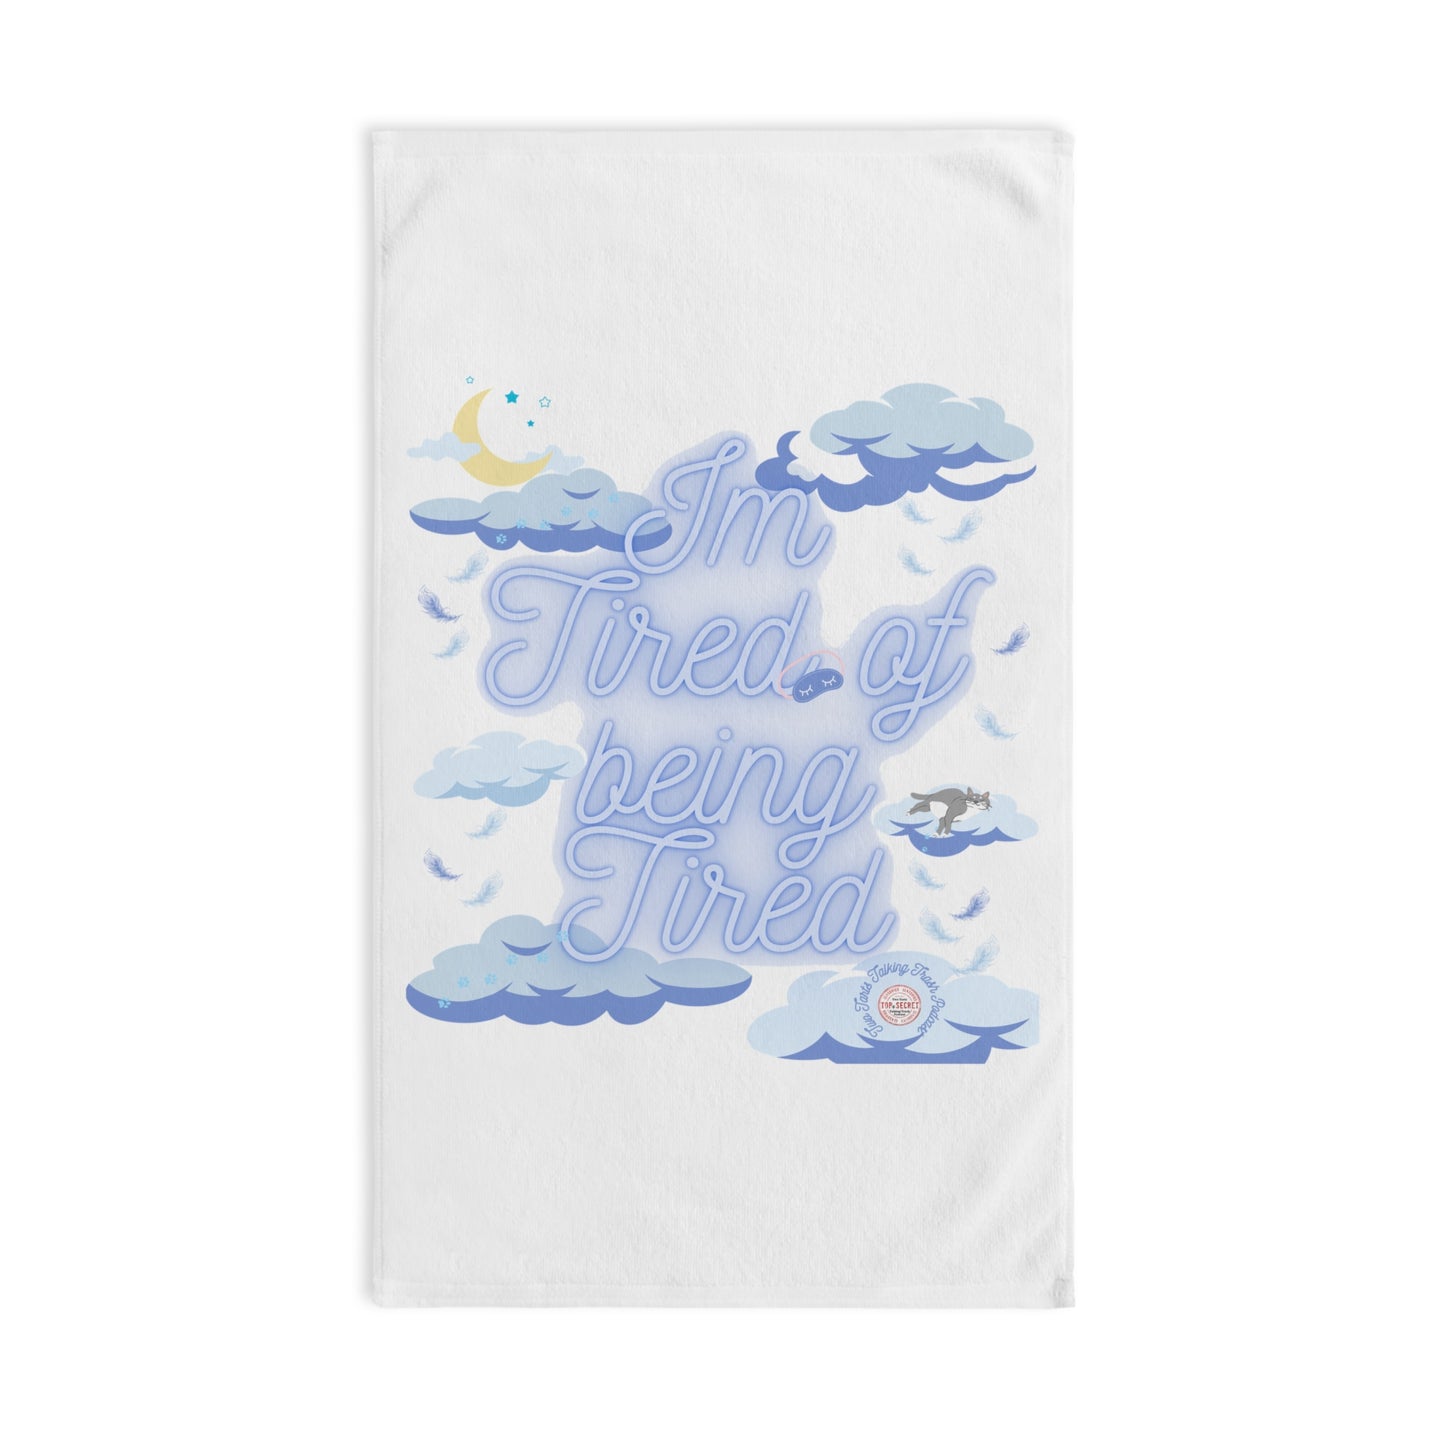 Two Tarts Talking Trash Podcast Tired Hand Towel